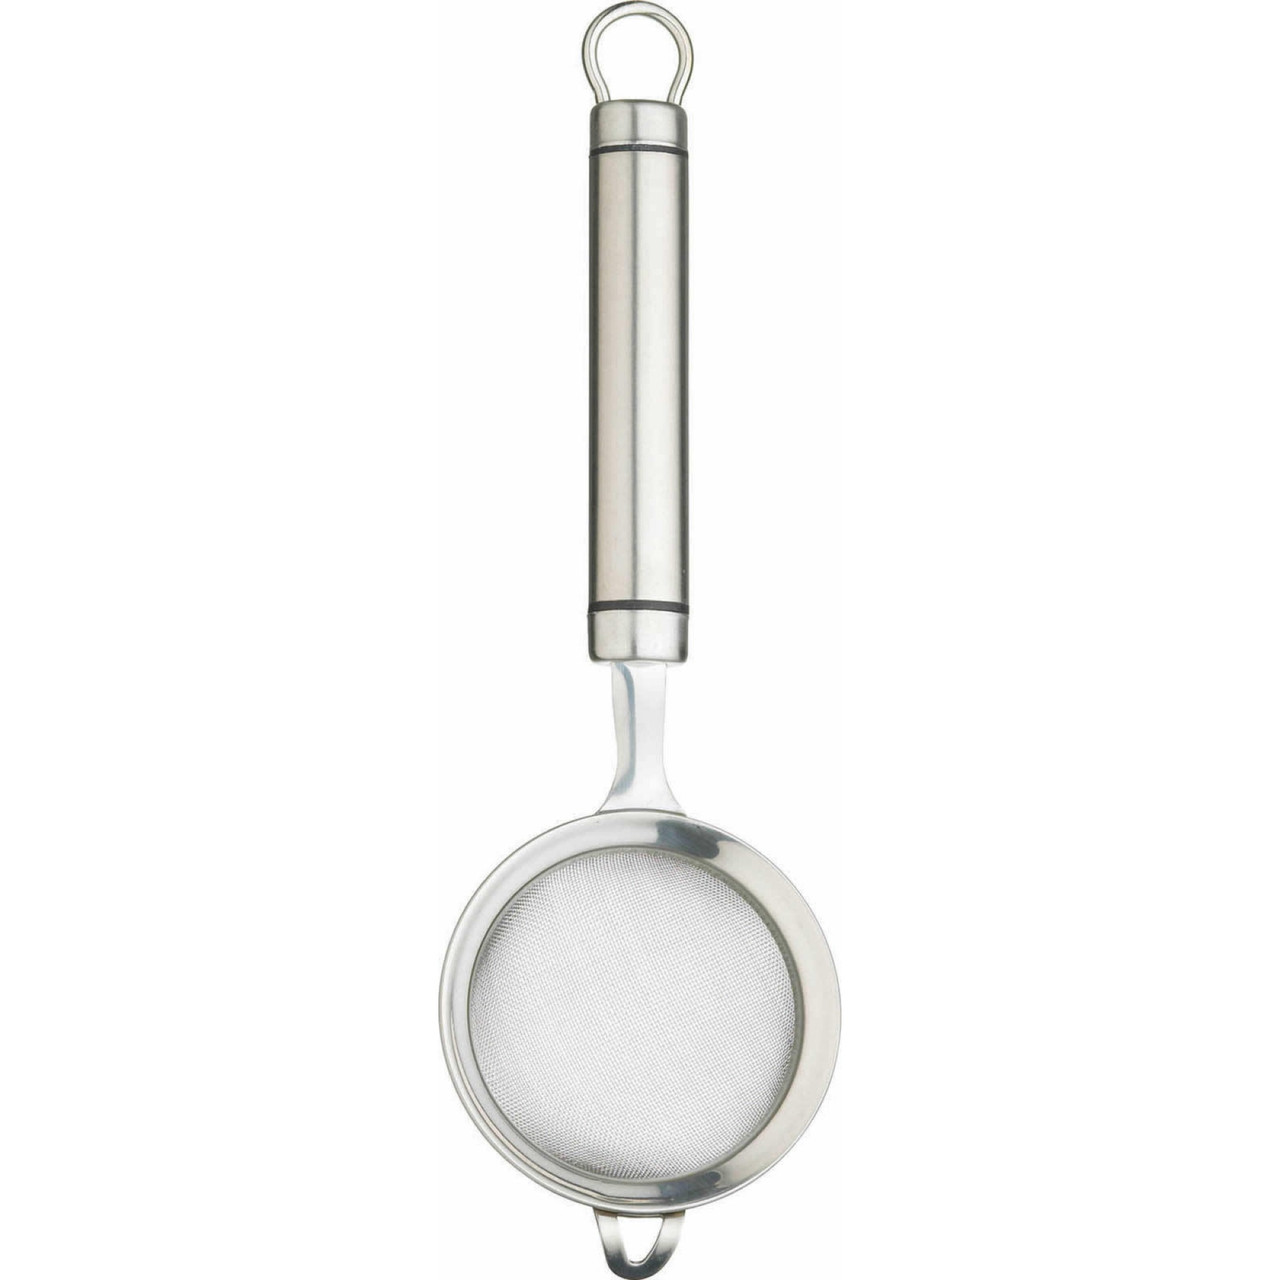 KITCHENCRAFT - OVAL HANDLED PROFESSIONAL STAINLESS STEEL SIEVE - 7cm